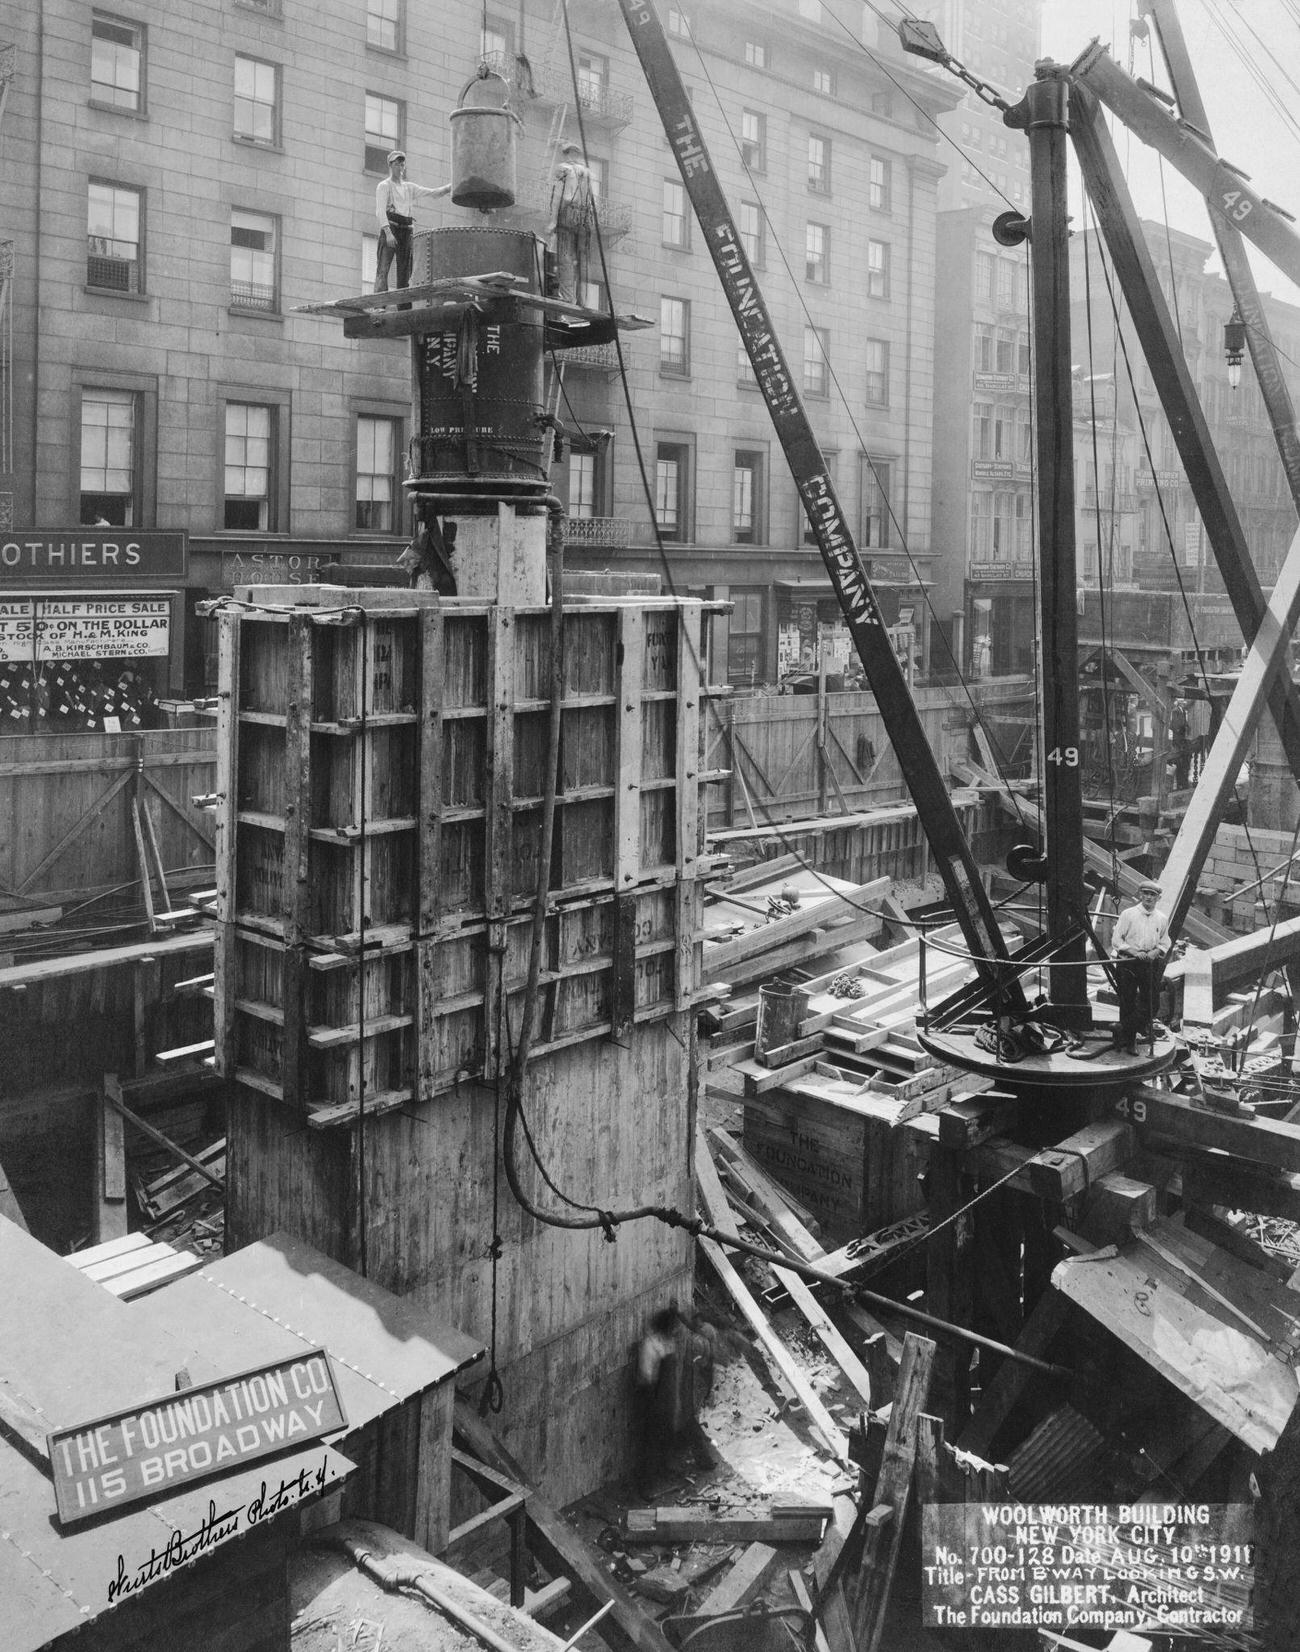 Concrete Is Poured Into One Of The Massive Columns Supporting The Superstructure Of The Woolworth Building In New York City, 10Th August 1910. The View Is From Broadway, Looking Southwest.